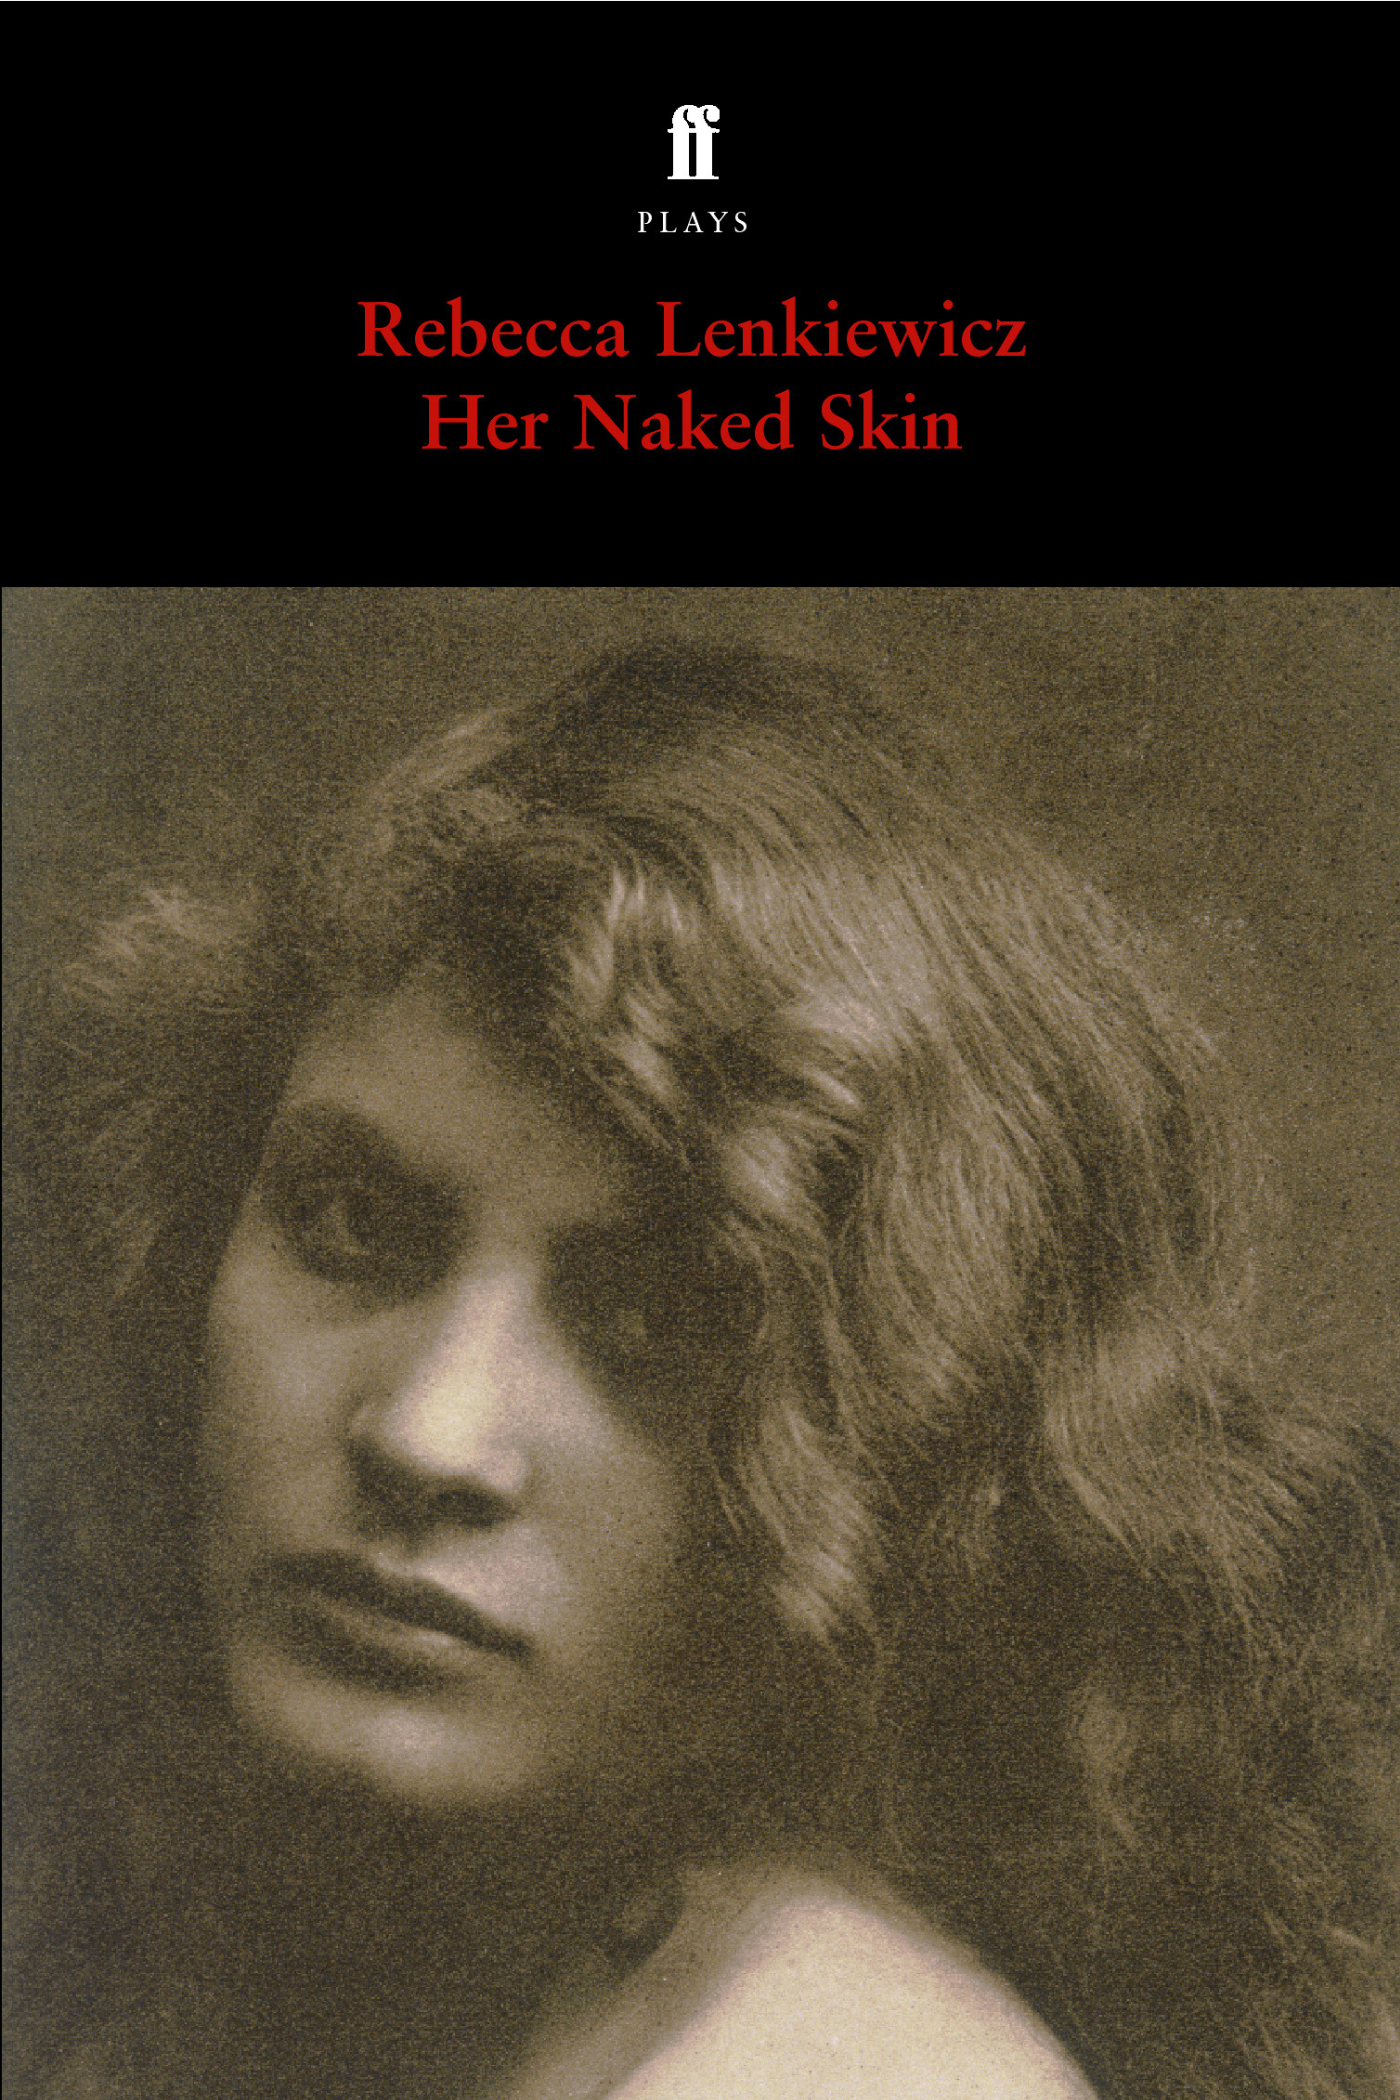 Rebecca Lenkiewicz, Her Naked Skin Poster.png